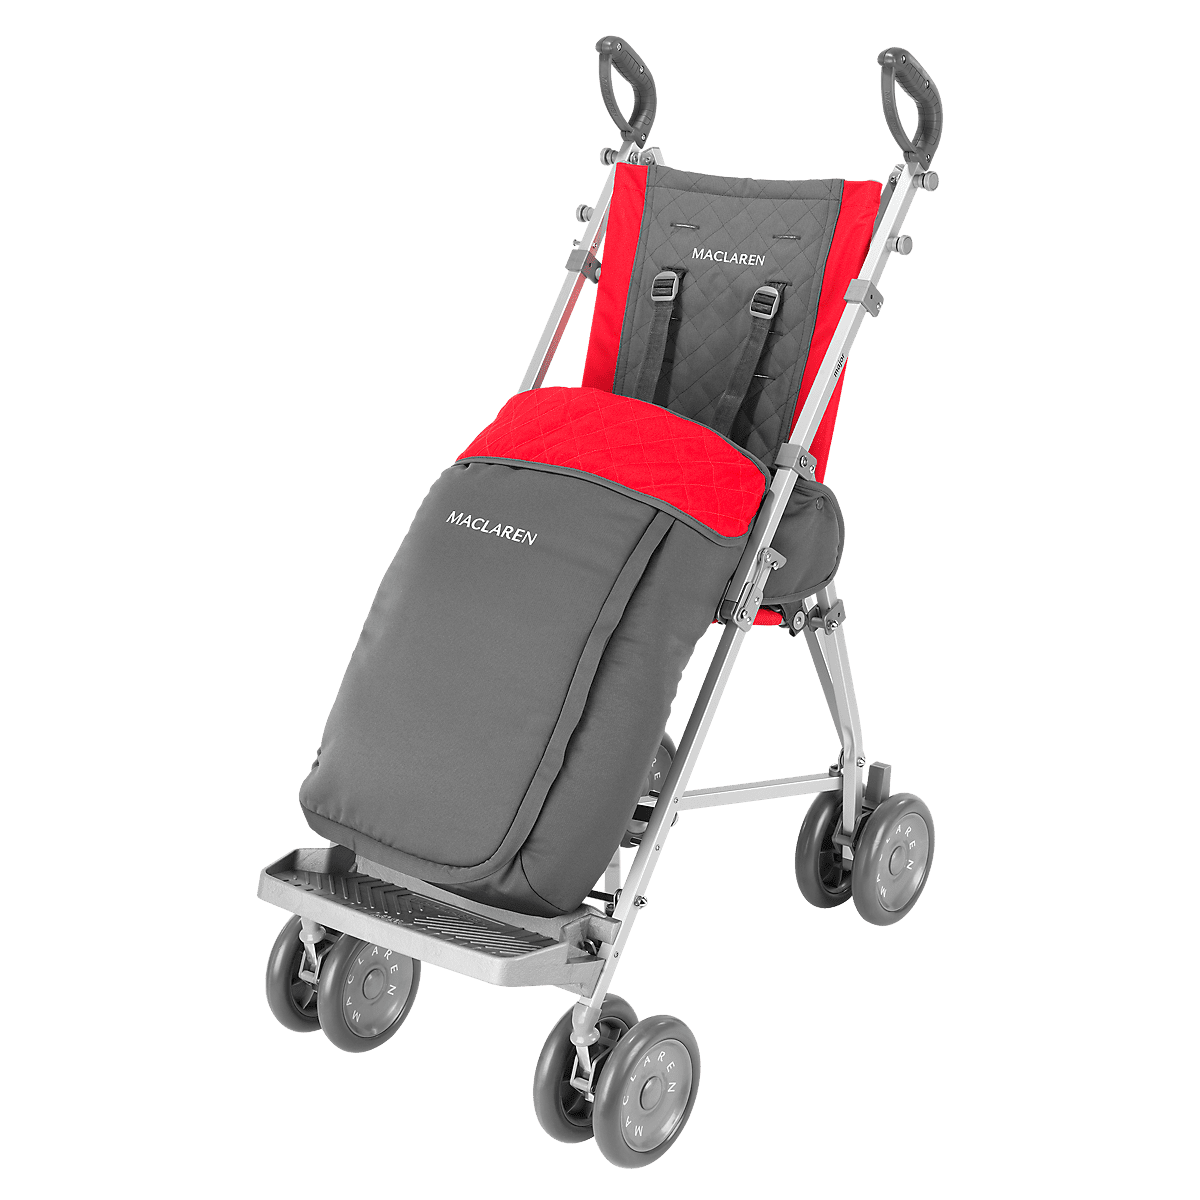 Designed for Special Needs Transport Chair Maclaren Major Boot Easily fits on Maclaren Major Elite Machine Washable Cold Weather Accessory 